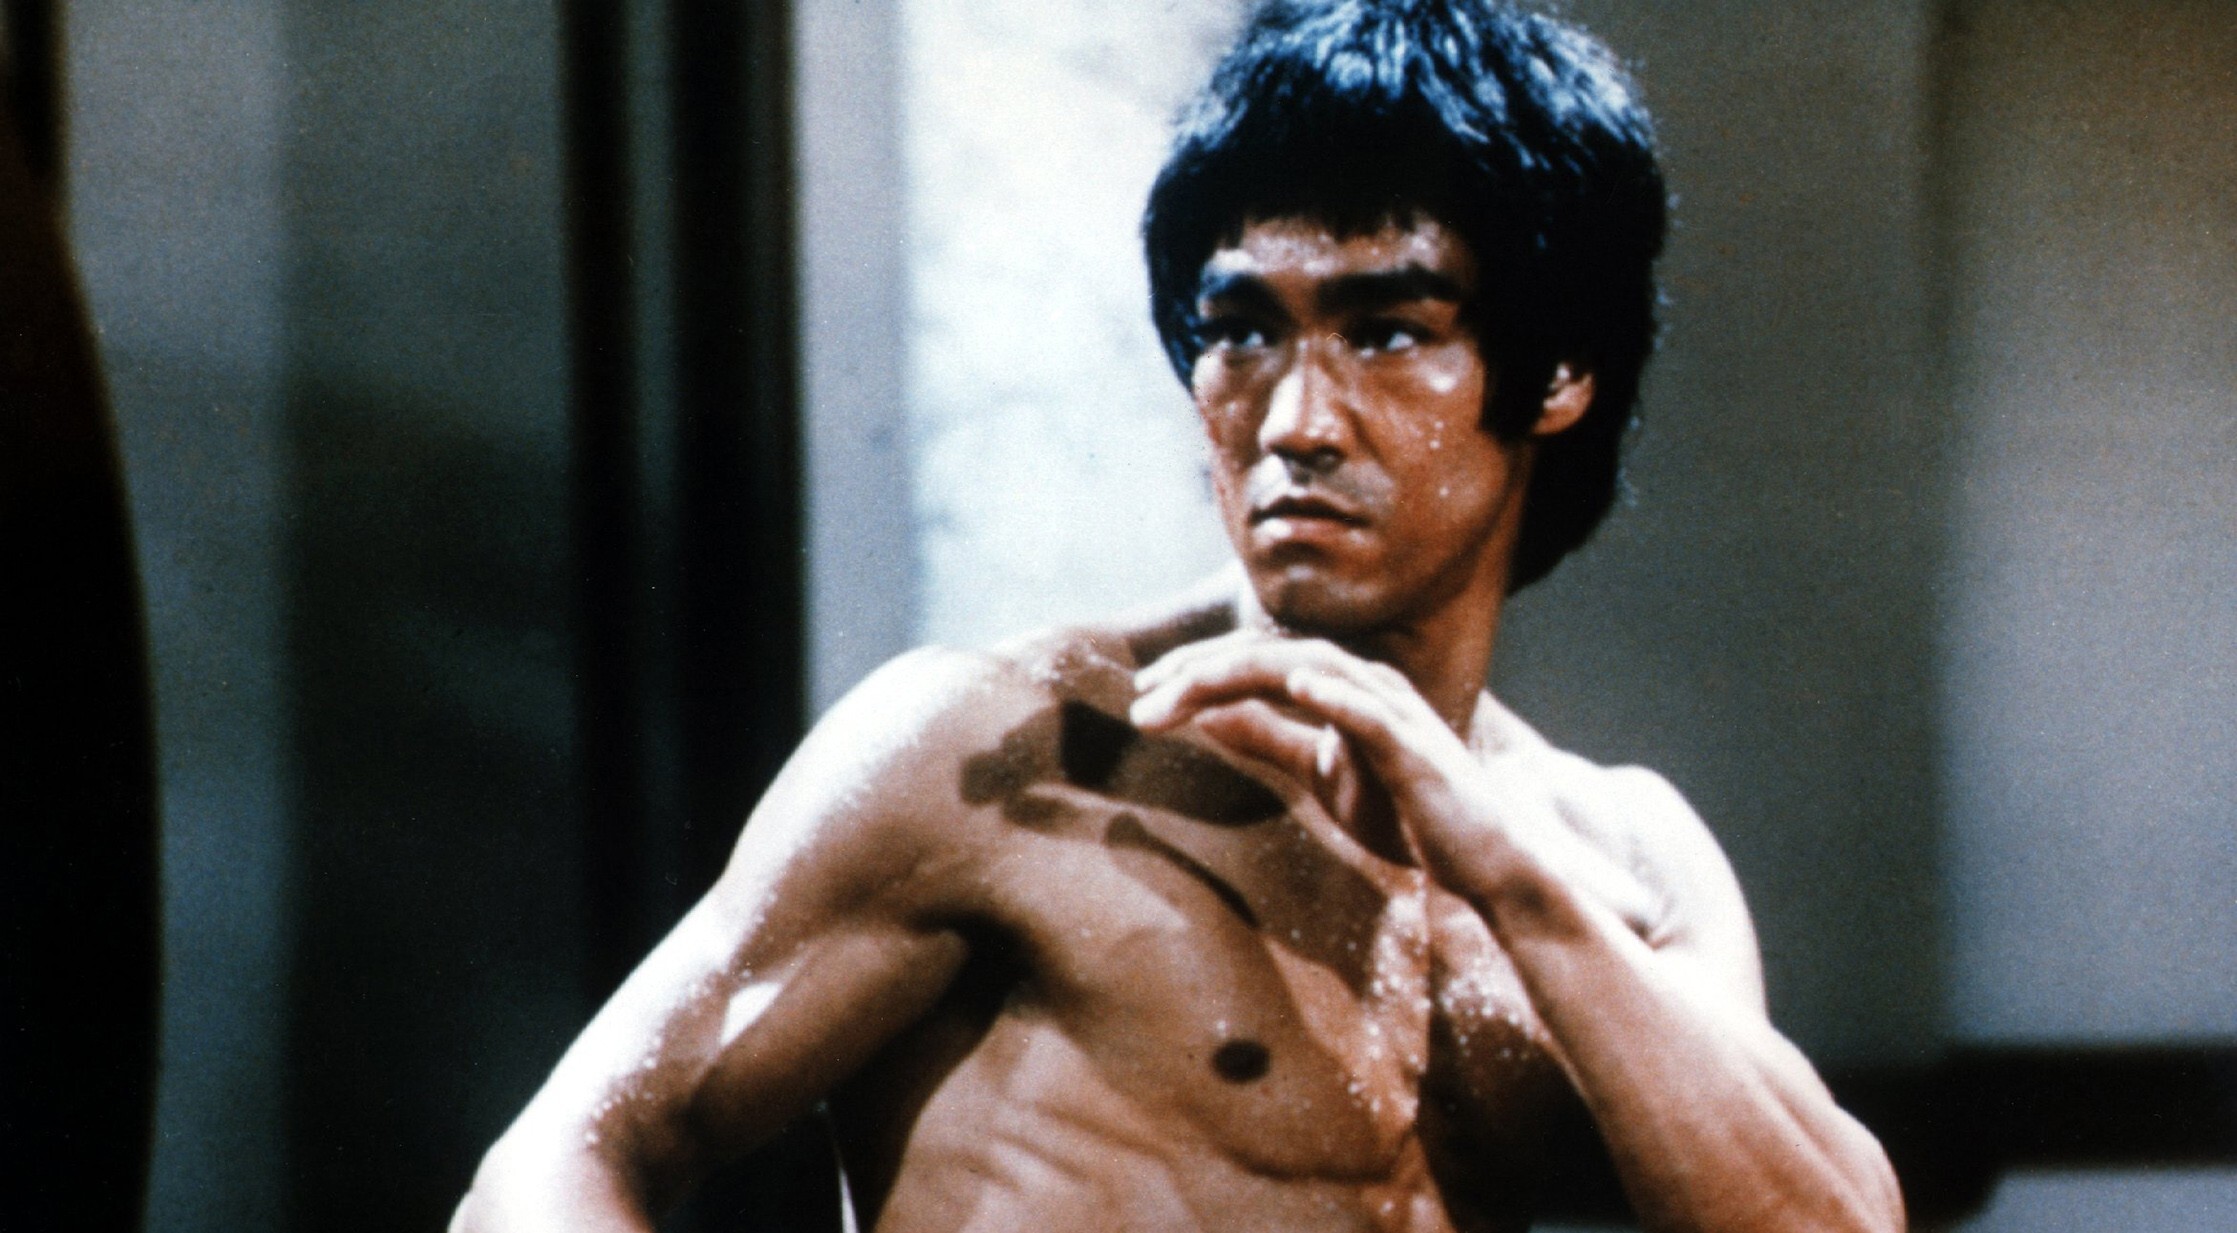 What You Didn't Know About Bruce Lee's Life In Los Angeles